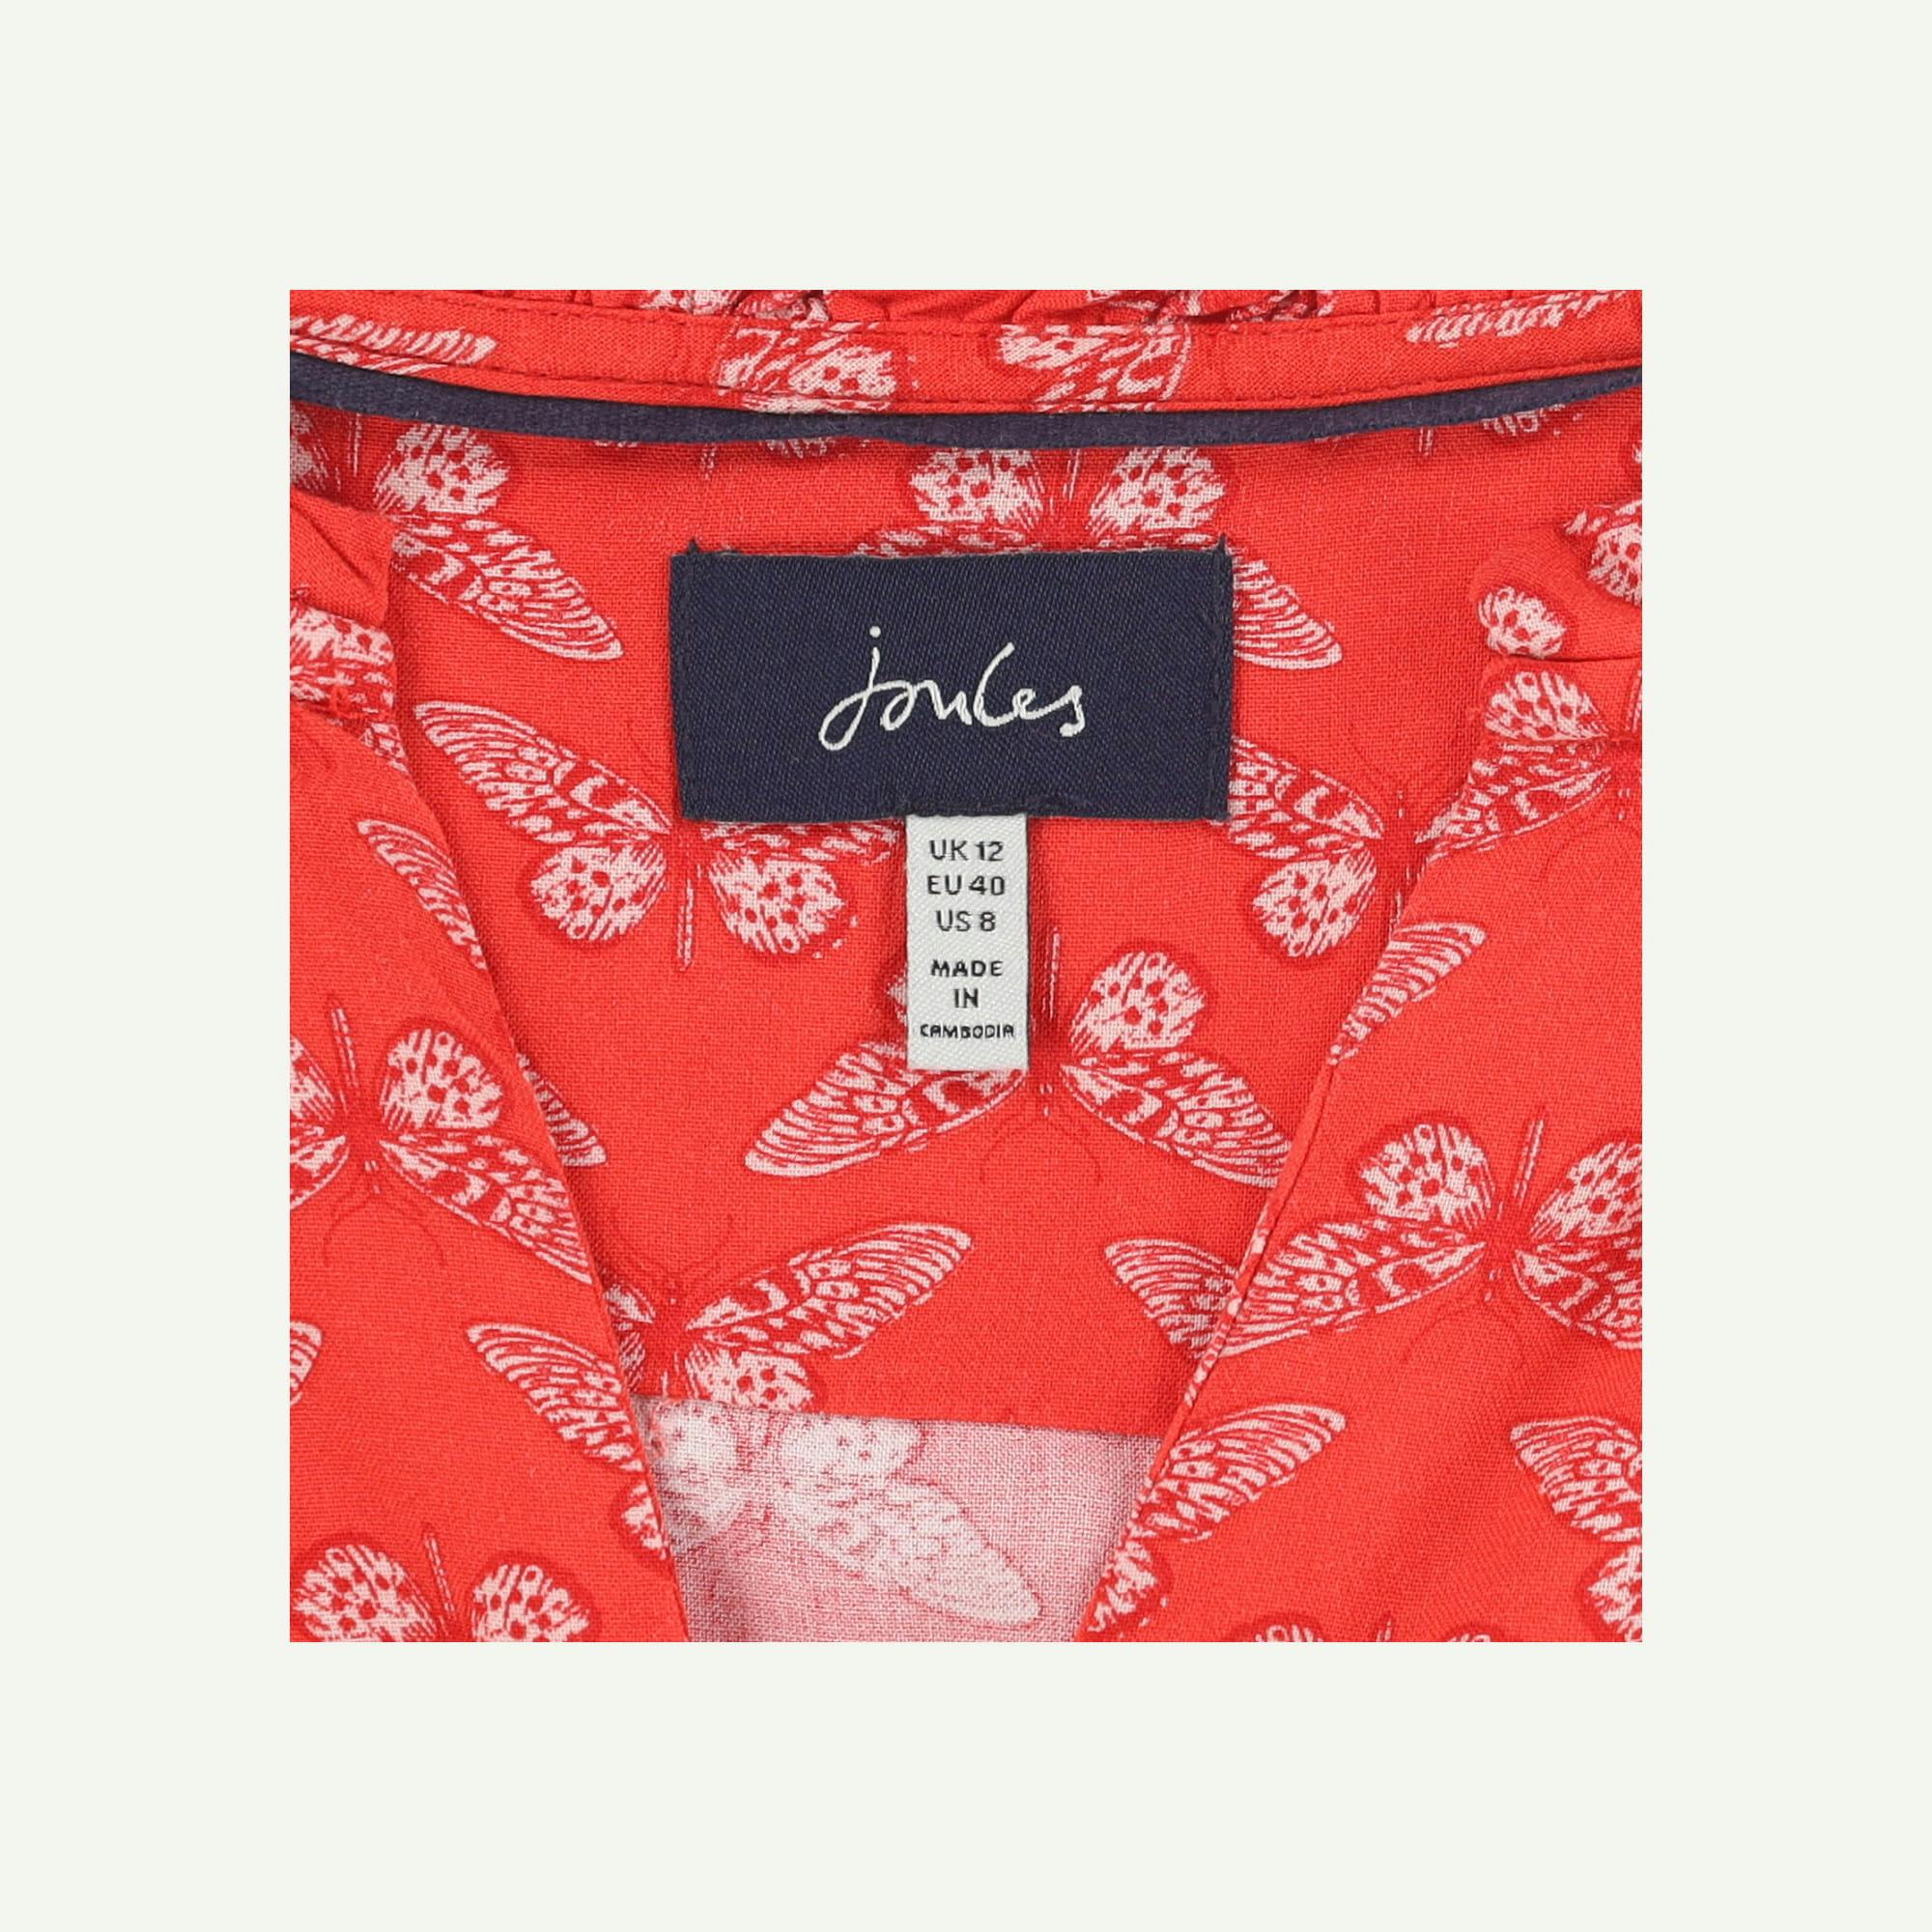 Joules Pre-loved Red Dress